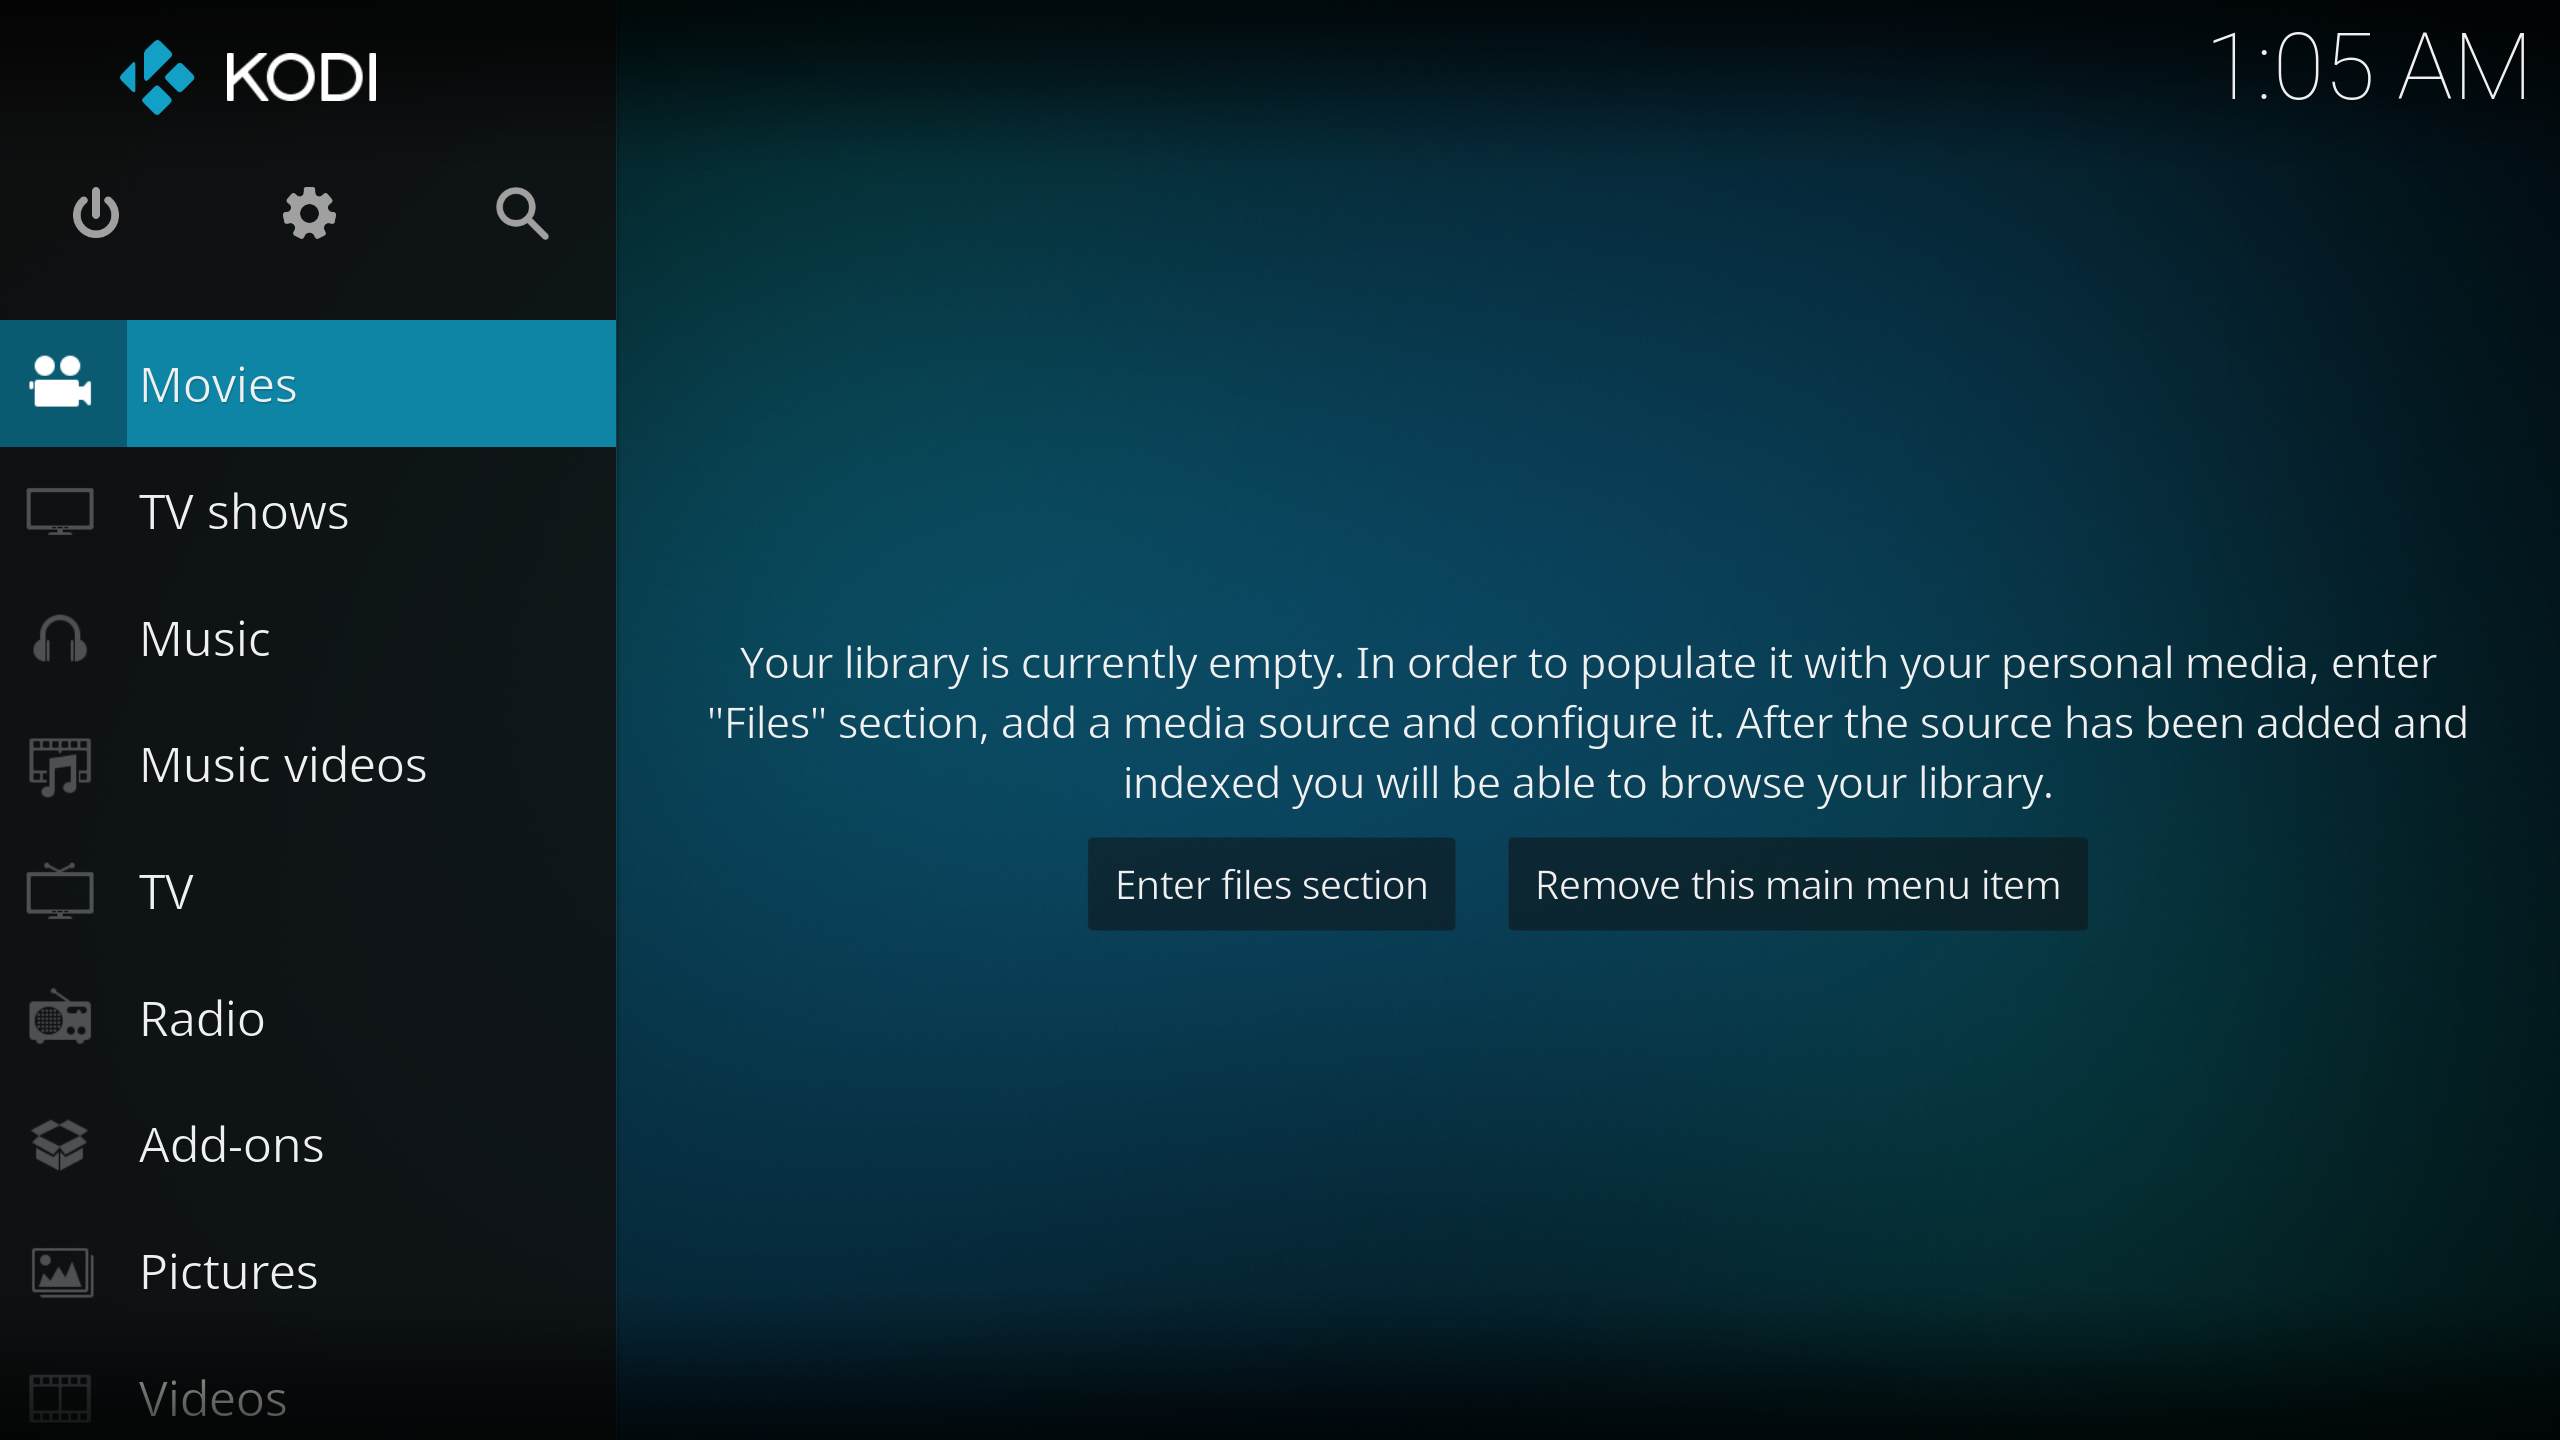 How to Install Kodi Media Center on openSUSE 42 -
</ol>
<div class=